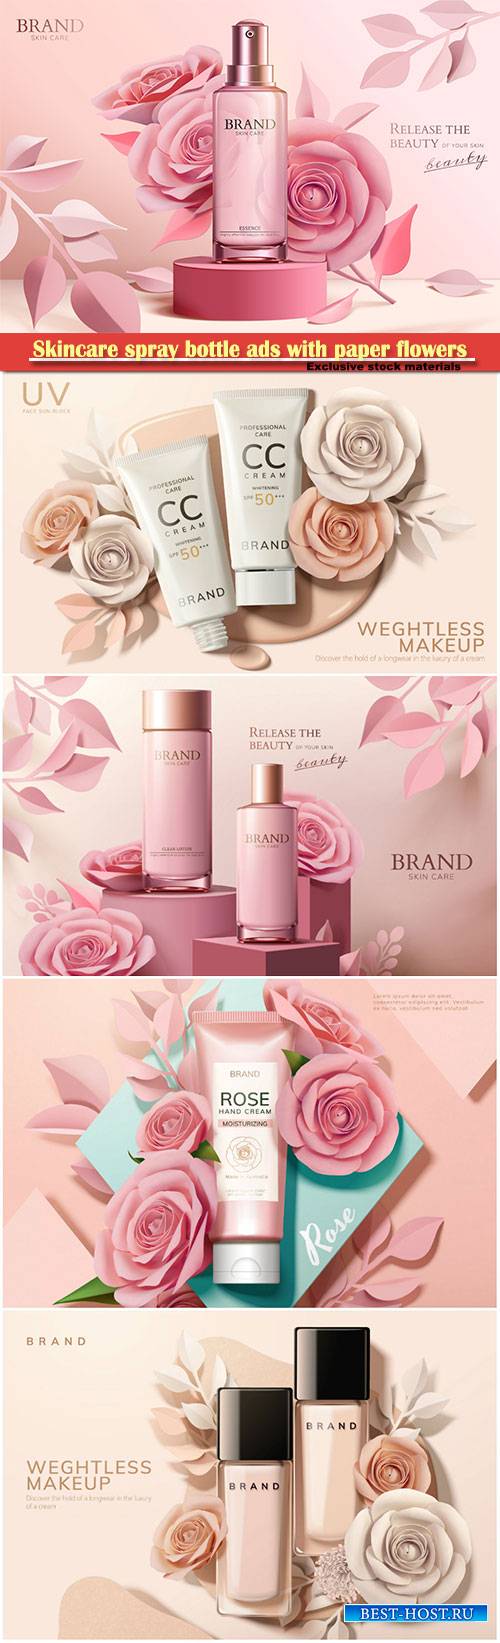 Skincare spray bottle ads with paper flowers, 3d illustration